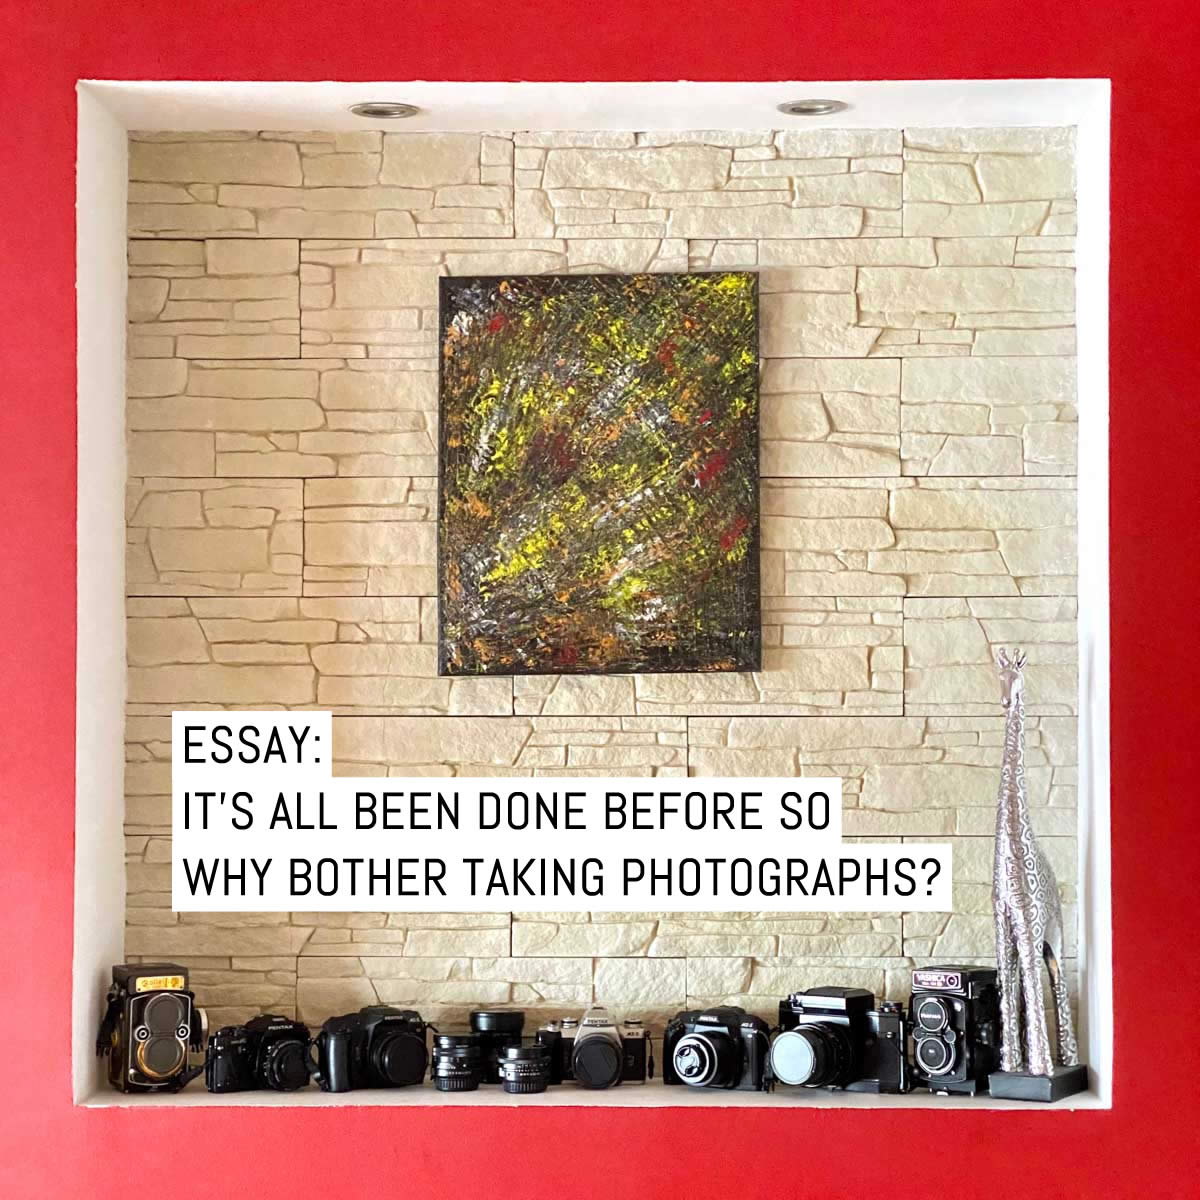 Essay: It’s all been done before so why bother taking photographs?